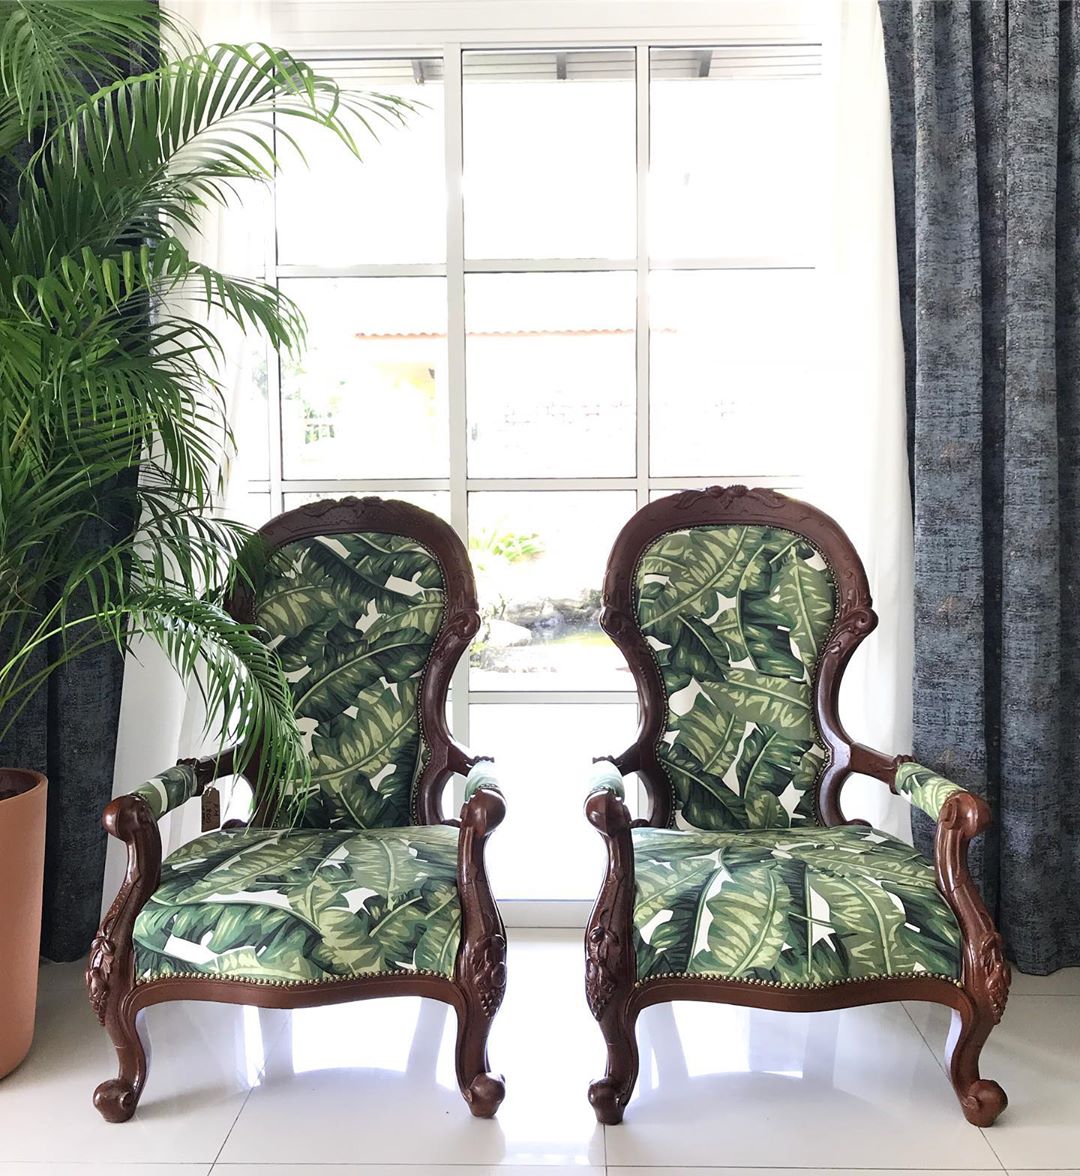 tropical chairs